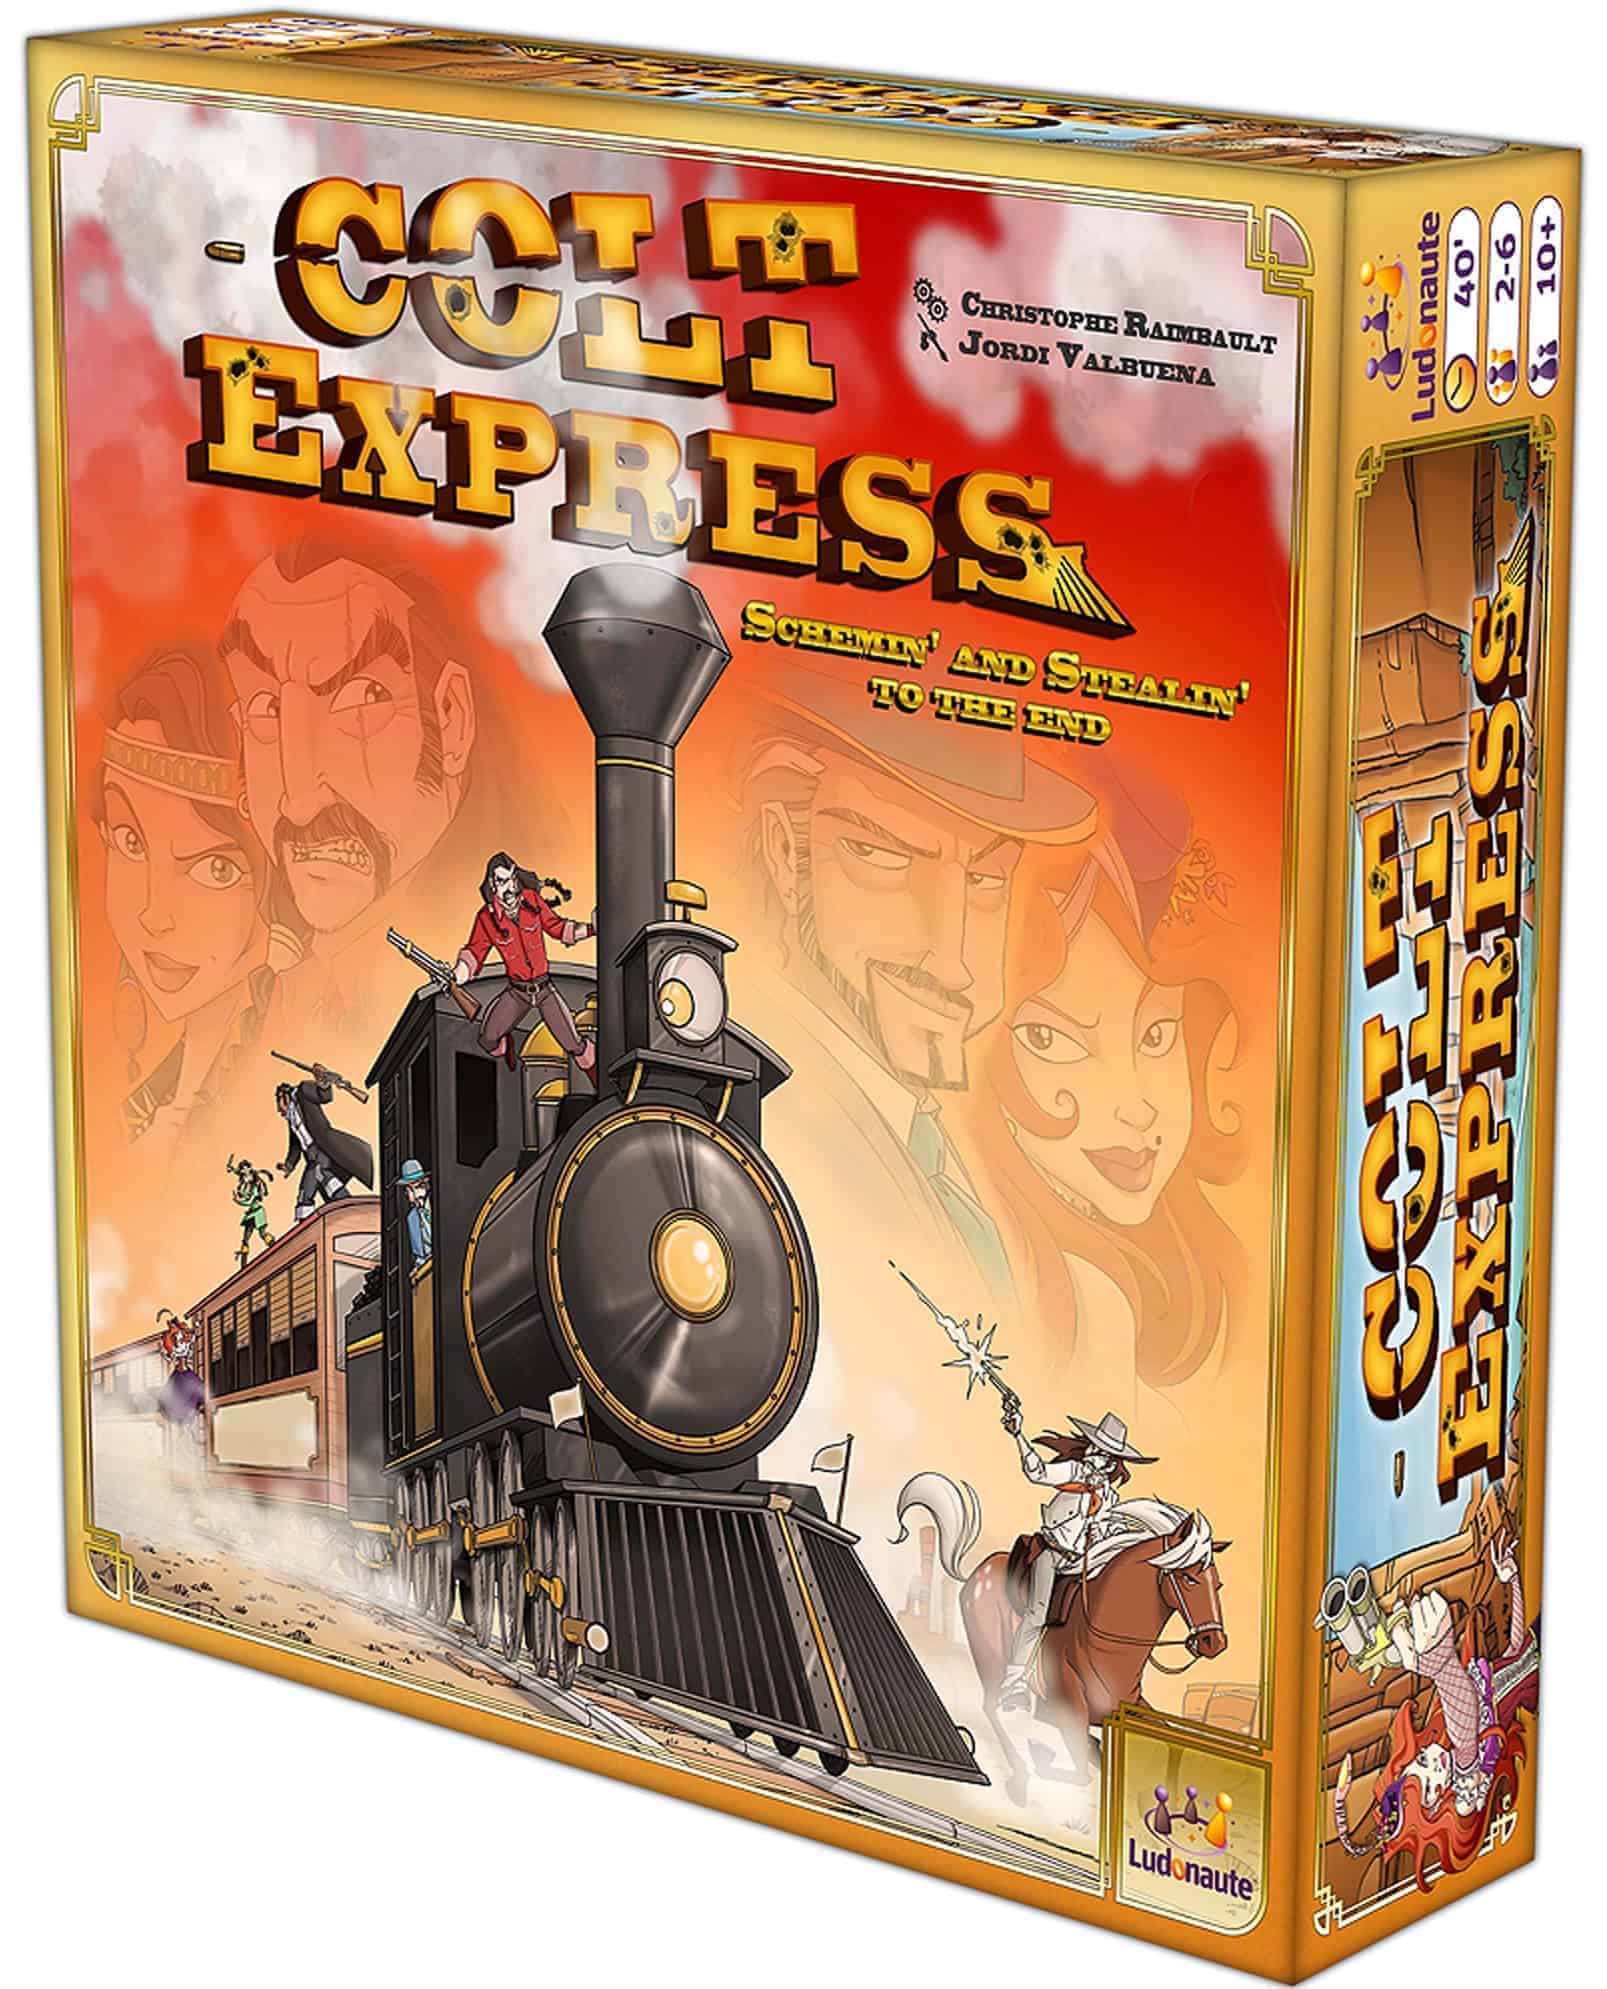 Colt Express is easy and extremely accessible, one of the best games for family with kids.